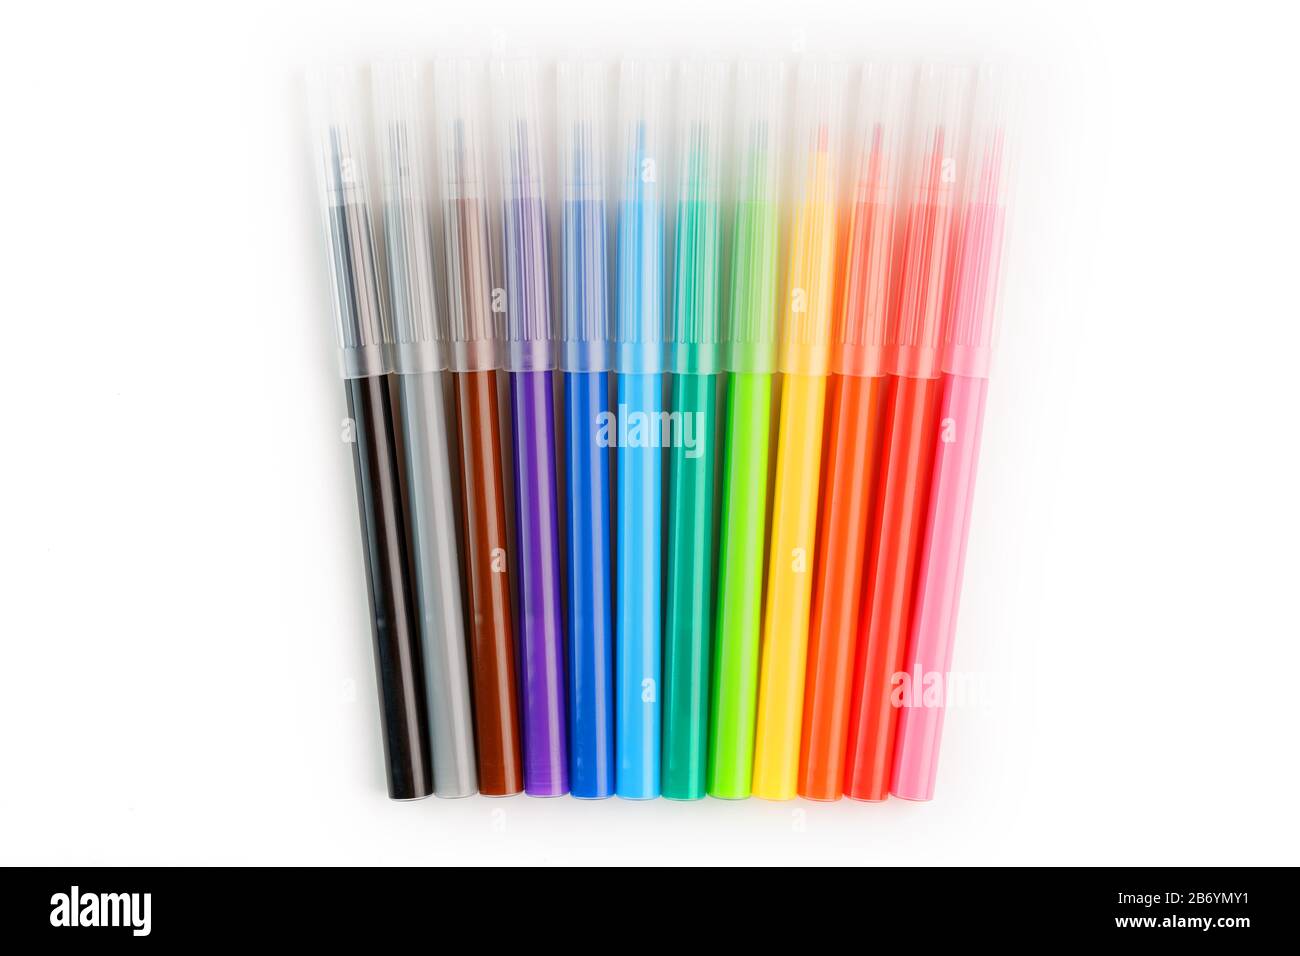 Closeup Of Set Of Colorful Rainbow Colored Marker Pens In A Row